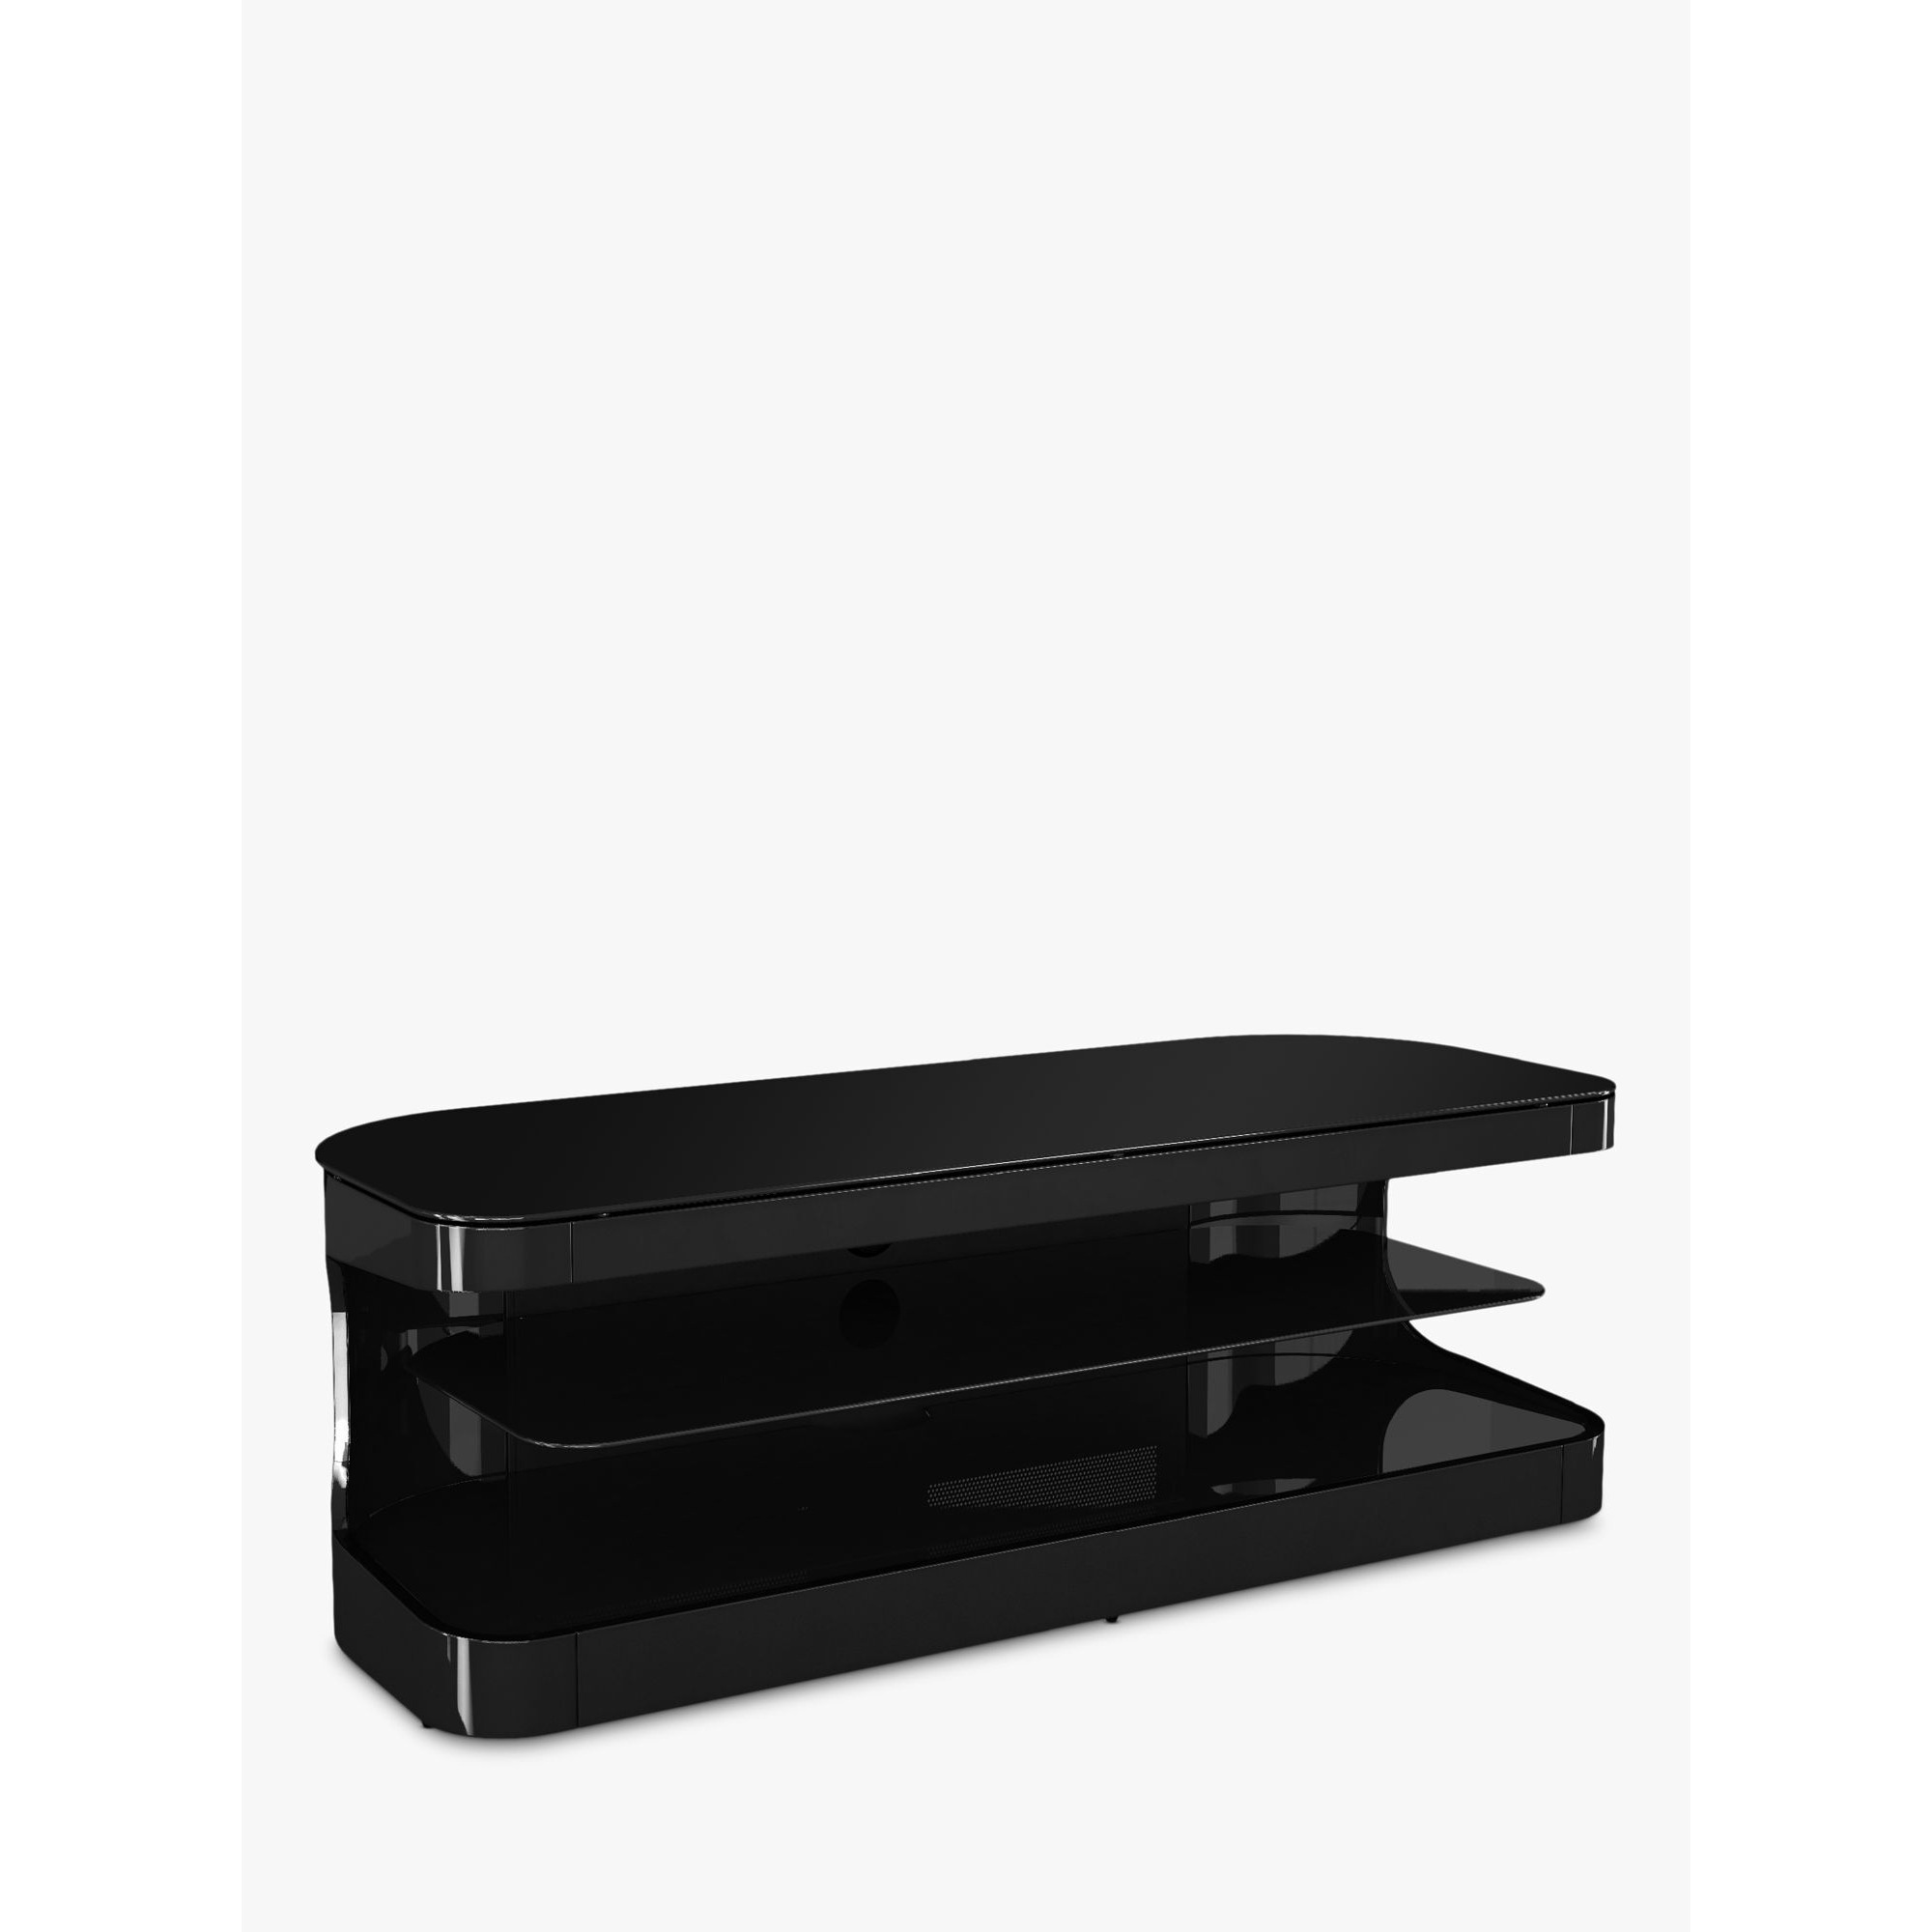 "AVF Affinity Premium Kensington 1250 TV Stand for TVs up to 65""" - image 1